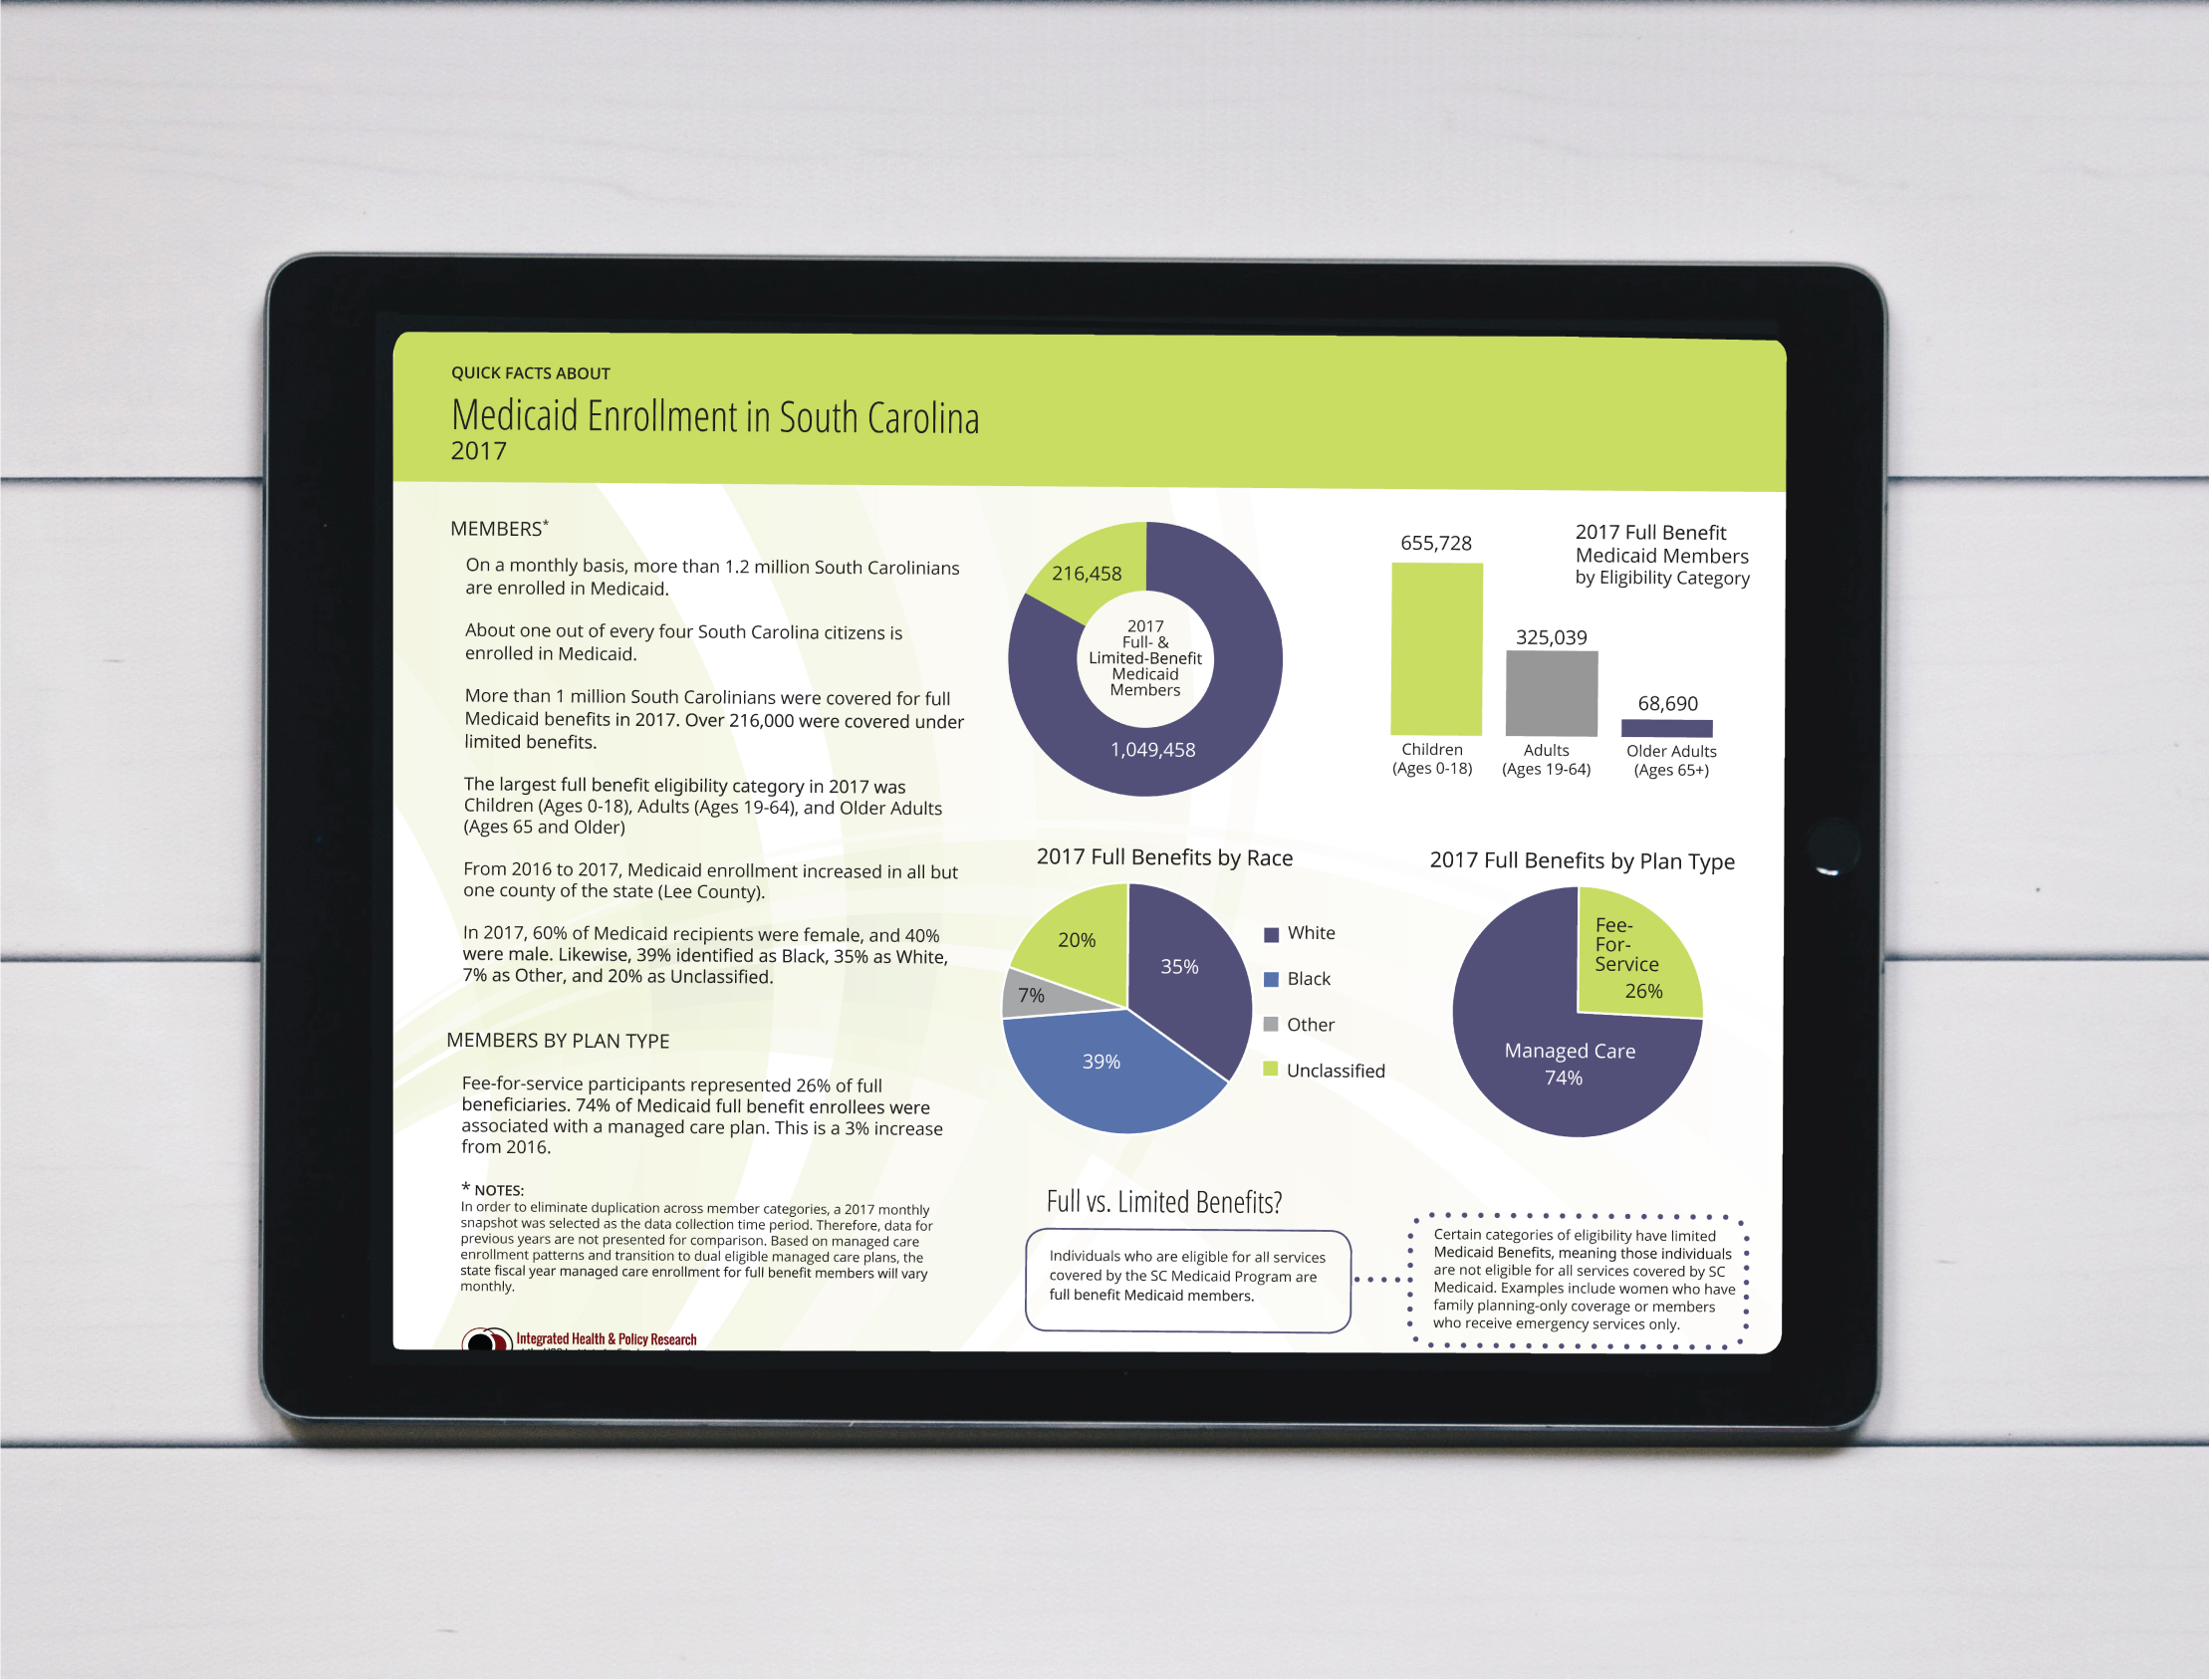 Quick Facts pdf shown on a tablet screen